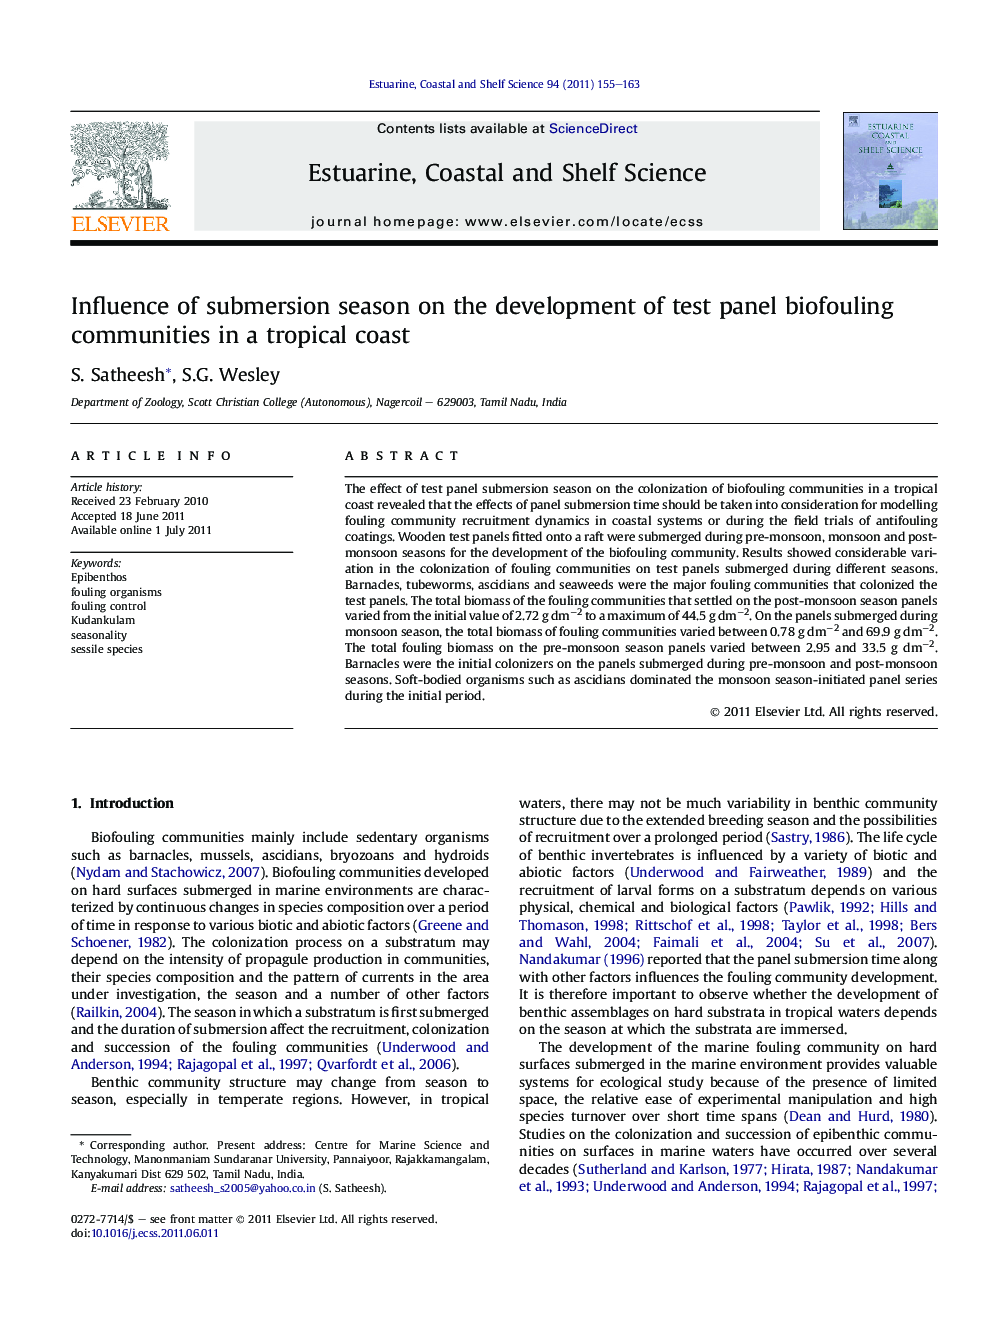 Influence of submersion season on the development of test panel biofouling communities in a tropical coast